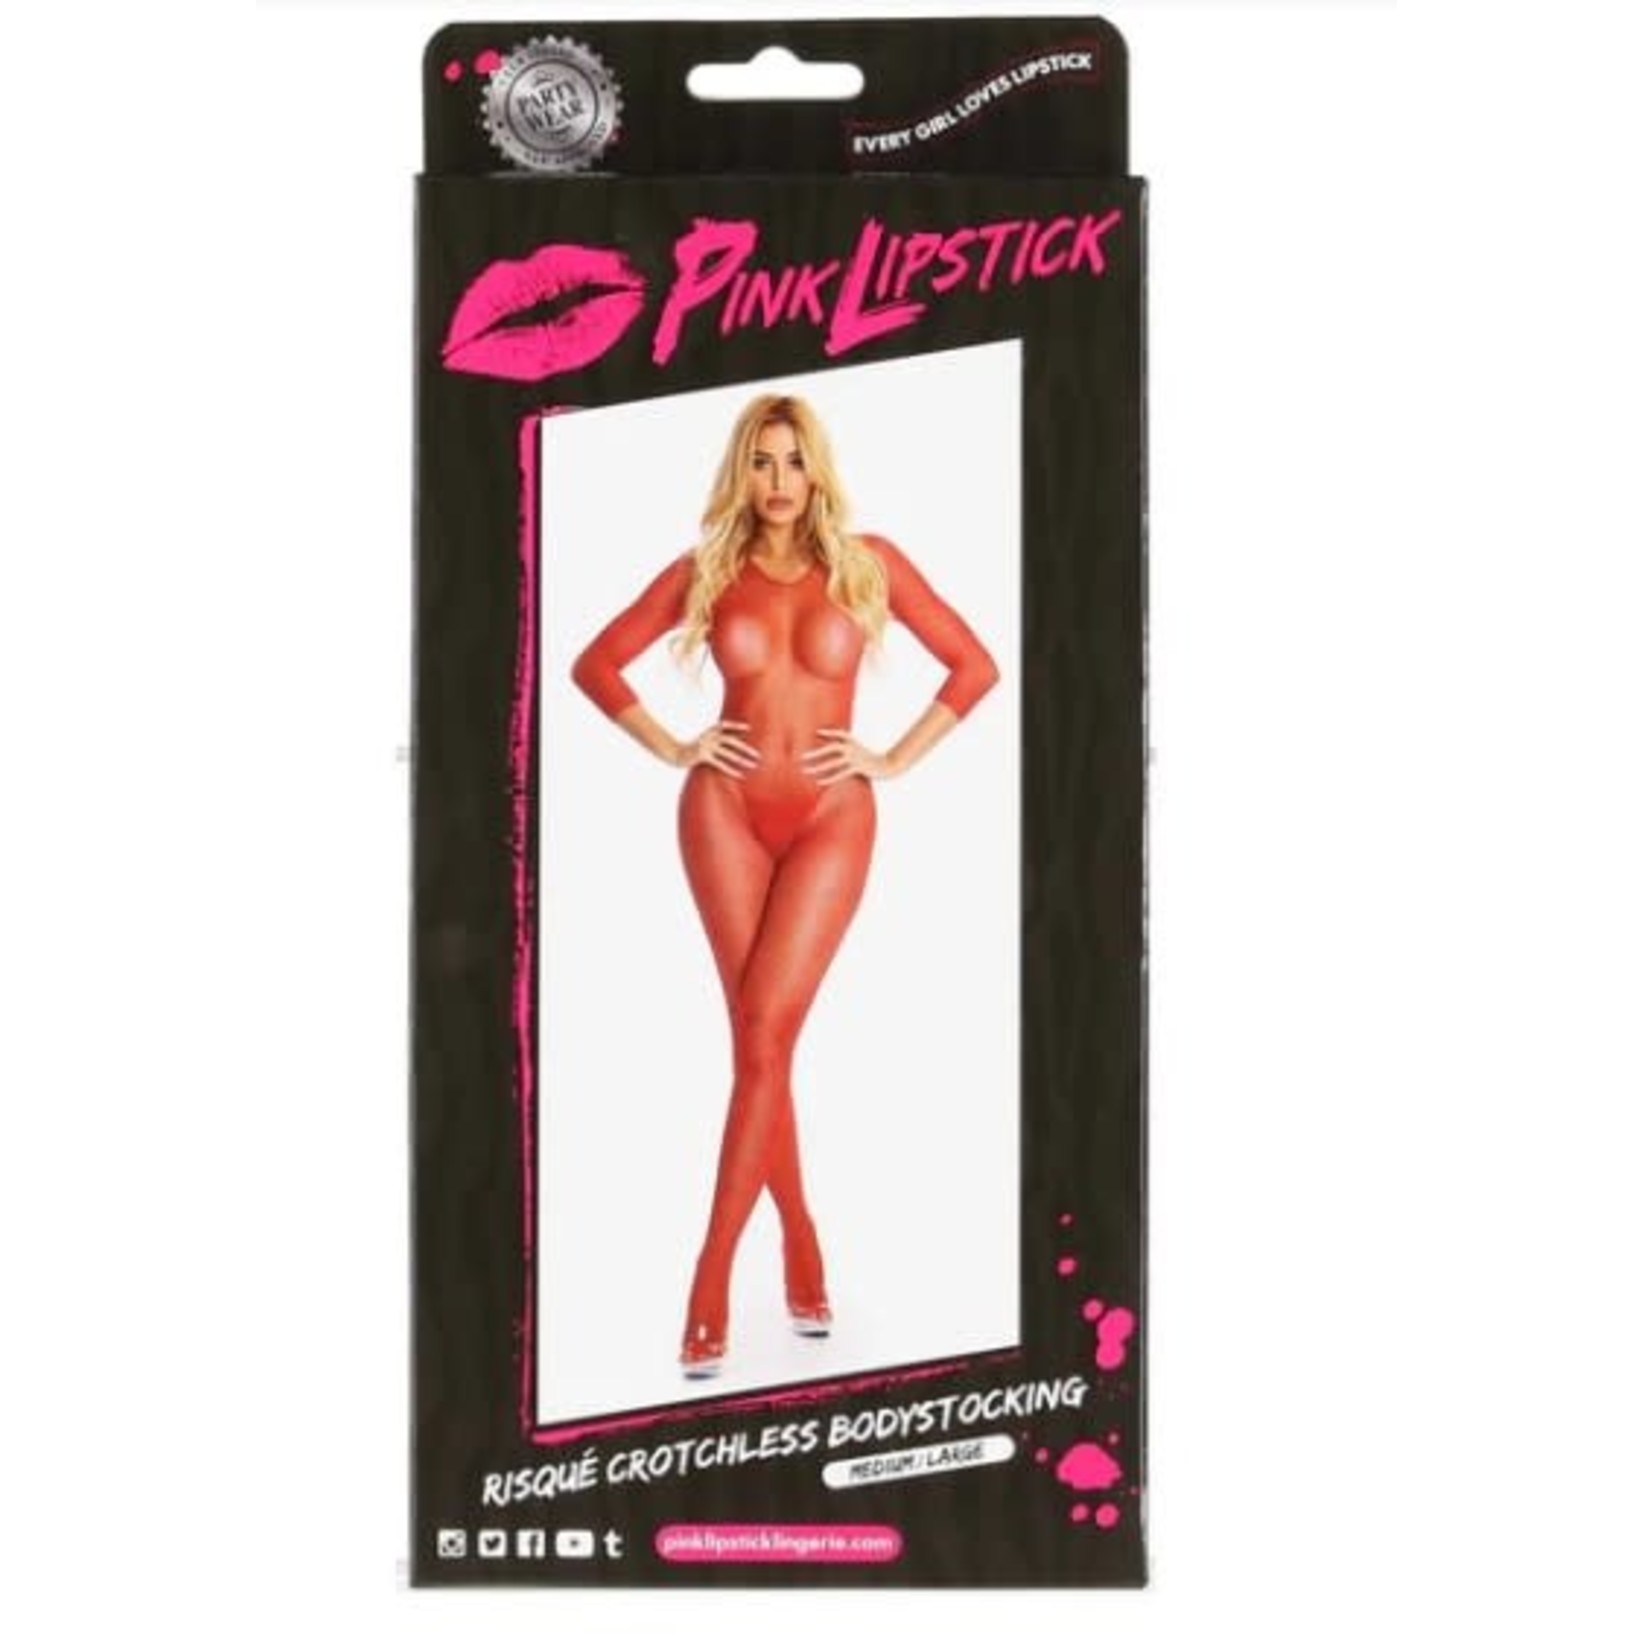 PINK LIPSTICK PINK LIPSTICK - RISQUE CROTCHLESS BODYSTOCKING - RED - M/L